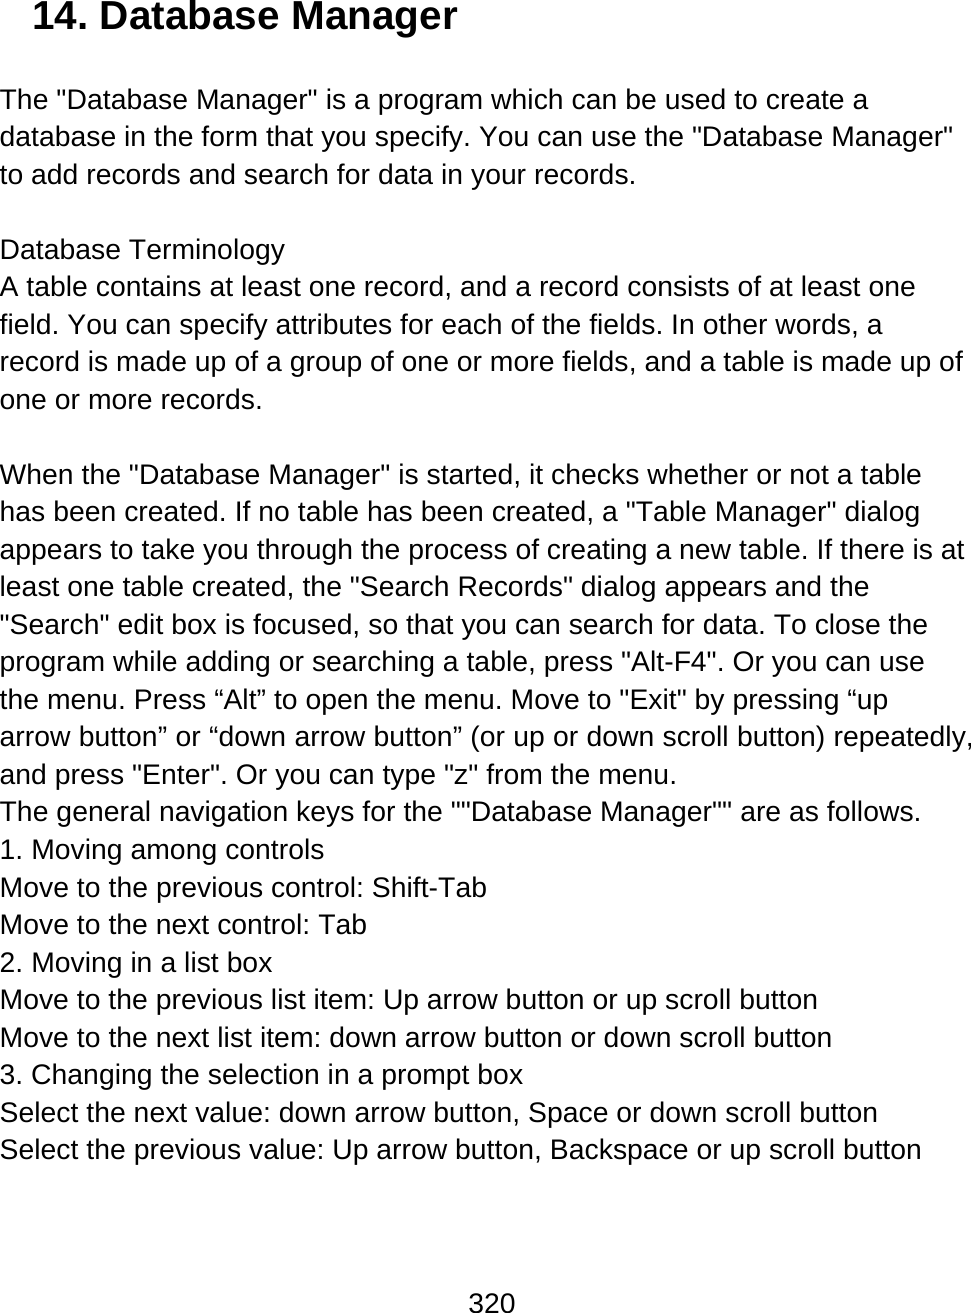 320  14. Database Manager  The &quot;Database Manager&quot; is a program which can be used to create a database in the form that you specify. You can use the &quot;Database Manager&quot; to add records and search for data in your records.   Database Terminology A table contains at least one record, and a record consists of at least one field. You can specify attributes for each of the fields. In other words, a record is made up of a group of one or more fields, and a table is made up of one or more records.  When the &quot;Database Manager&quot; is started, it checks whether or not a table has been created. If no table has been created, a &quot;Table Manager&quot; dialog appears to take you through the process of creating a new table. If there is at least one table created, the &quot;Search Records&quot; dialog appears and the &quot;Search&quot; edit box is focused, so that you can search for data. To close the program while adding or searching a table, press &quot;Alt-F4&quot;. Or you can use the menu. Press “Alt” to open the menu. Move to &quot;Exit&quot; by pressing “up arrow button” or “down arrow button” (or up or down scroll button) repeatedly, and press &quot;Enter&quot;. Or you can type &quot;z&quot; from the menu. The general navigation keys for the &quot;&quot;Database Manager&quot;&quot; are as follows. 1. Moving among controls Move to the previous control: Shift-Tab Move to the next control: Tab  2. Moving in a list box Move to the previous list item: Up arrow button or up scroll button Move to the next list item: down arrow button or down scroll button 3. Changing the selection in a prompt box Select the next value: down arrow button, Space or down scroll button Select the previous value: Up arrow button, Backspace or up scroll button  